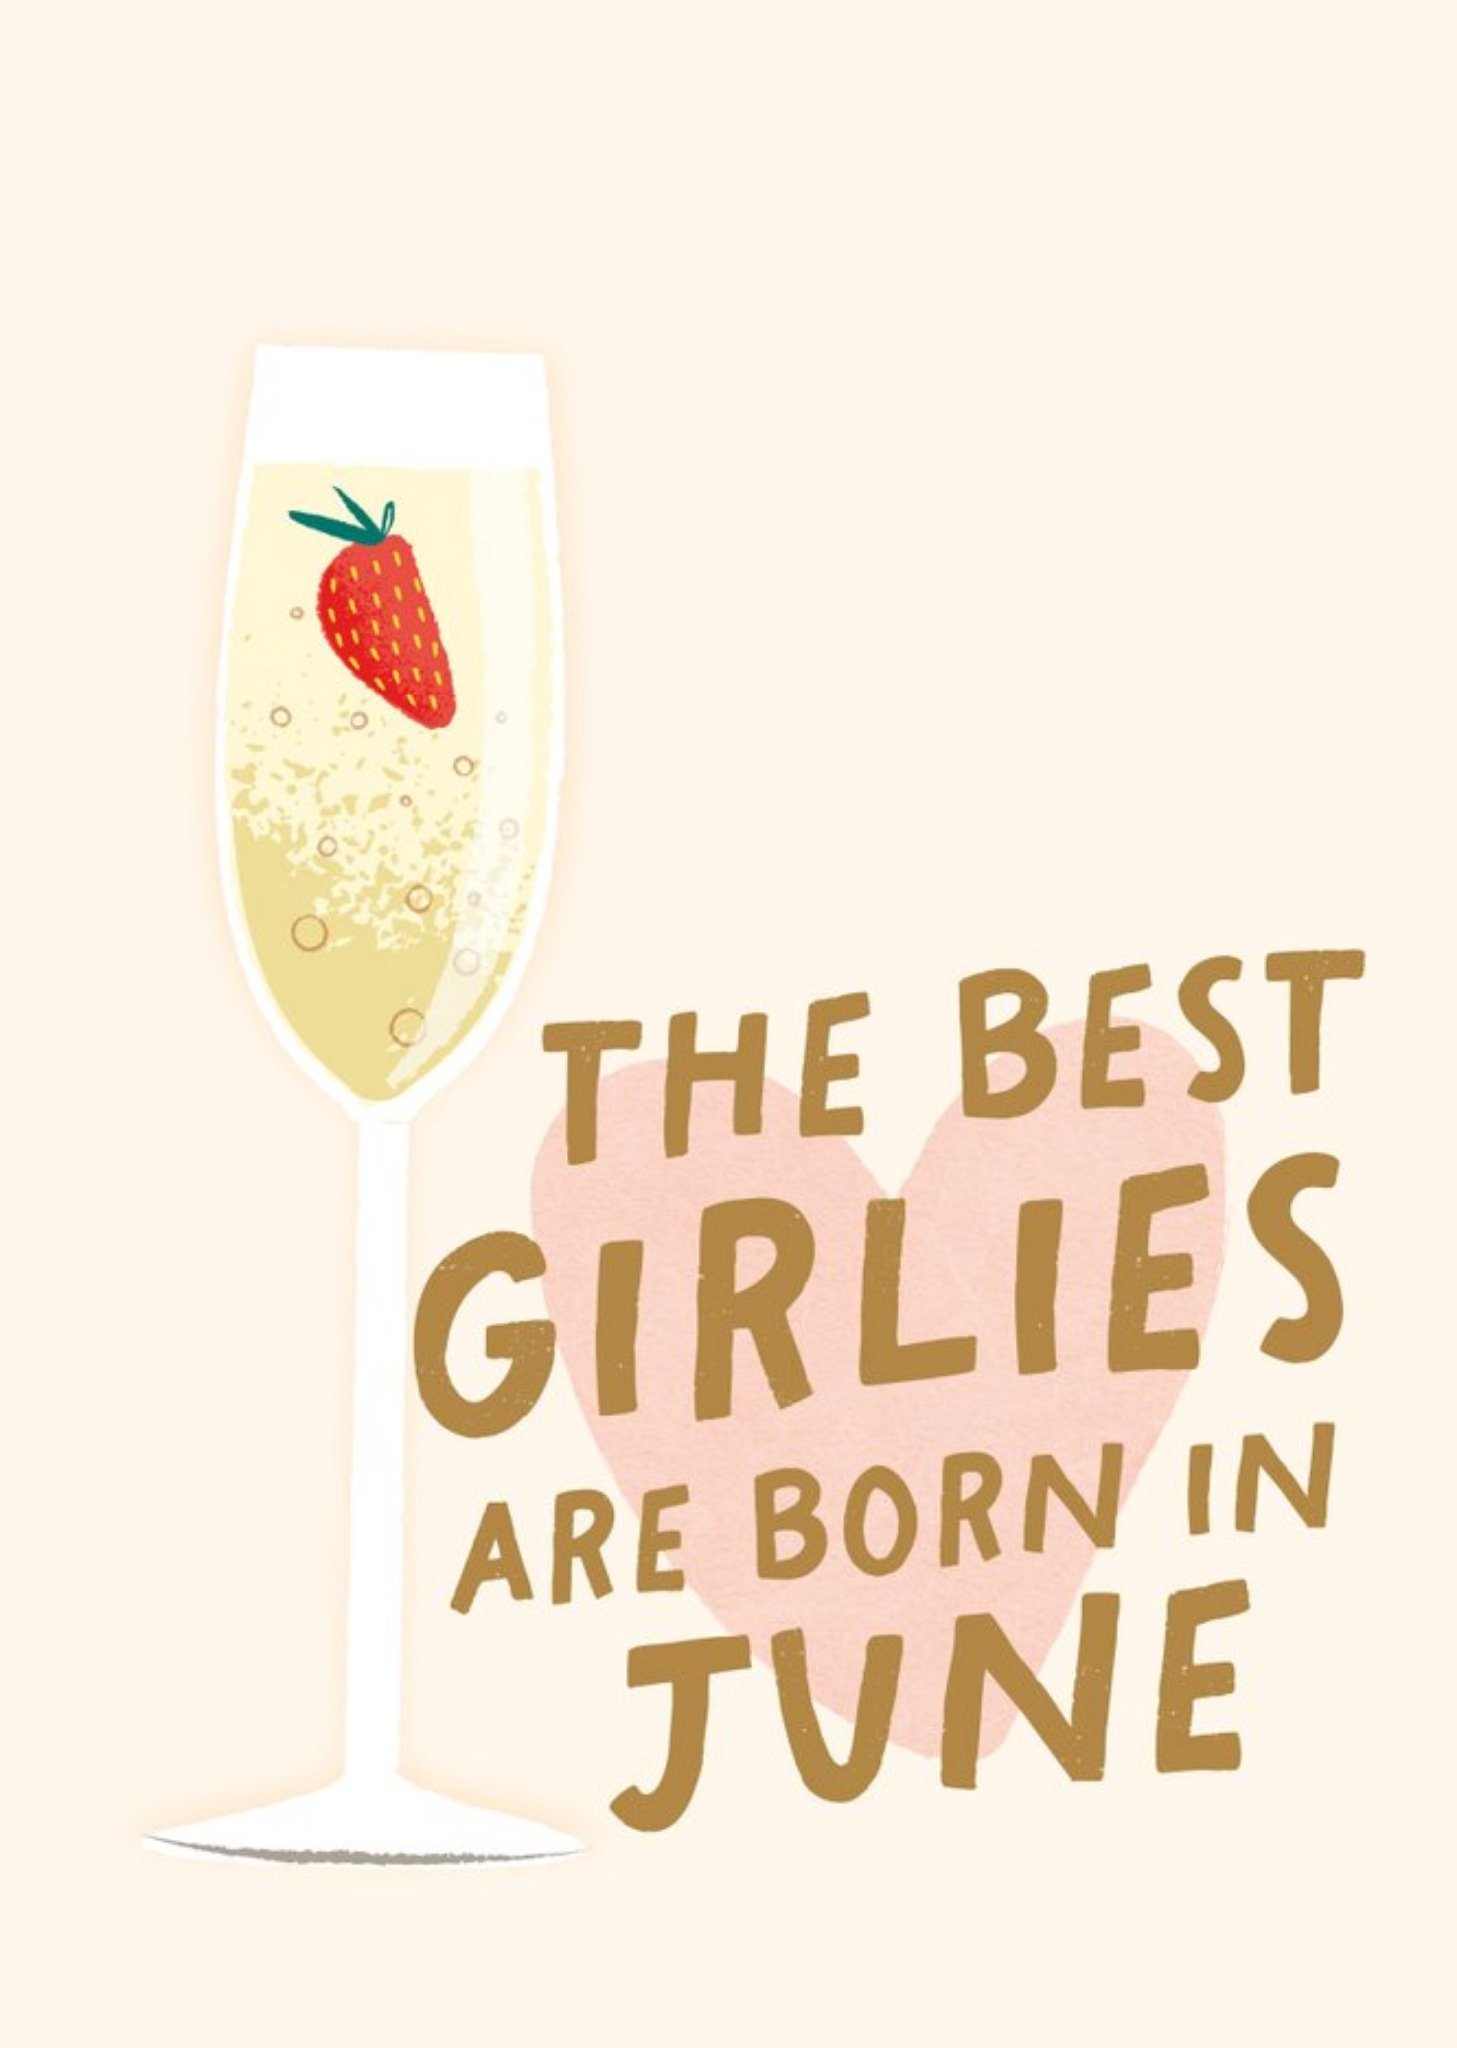 The London Studio Illustration Of A Glass Of Wine The Best Girlies Are Born In June Birthday Card Ec